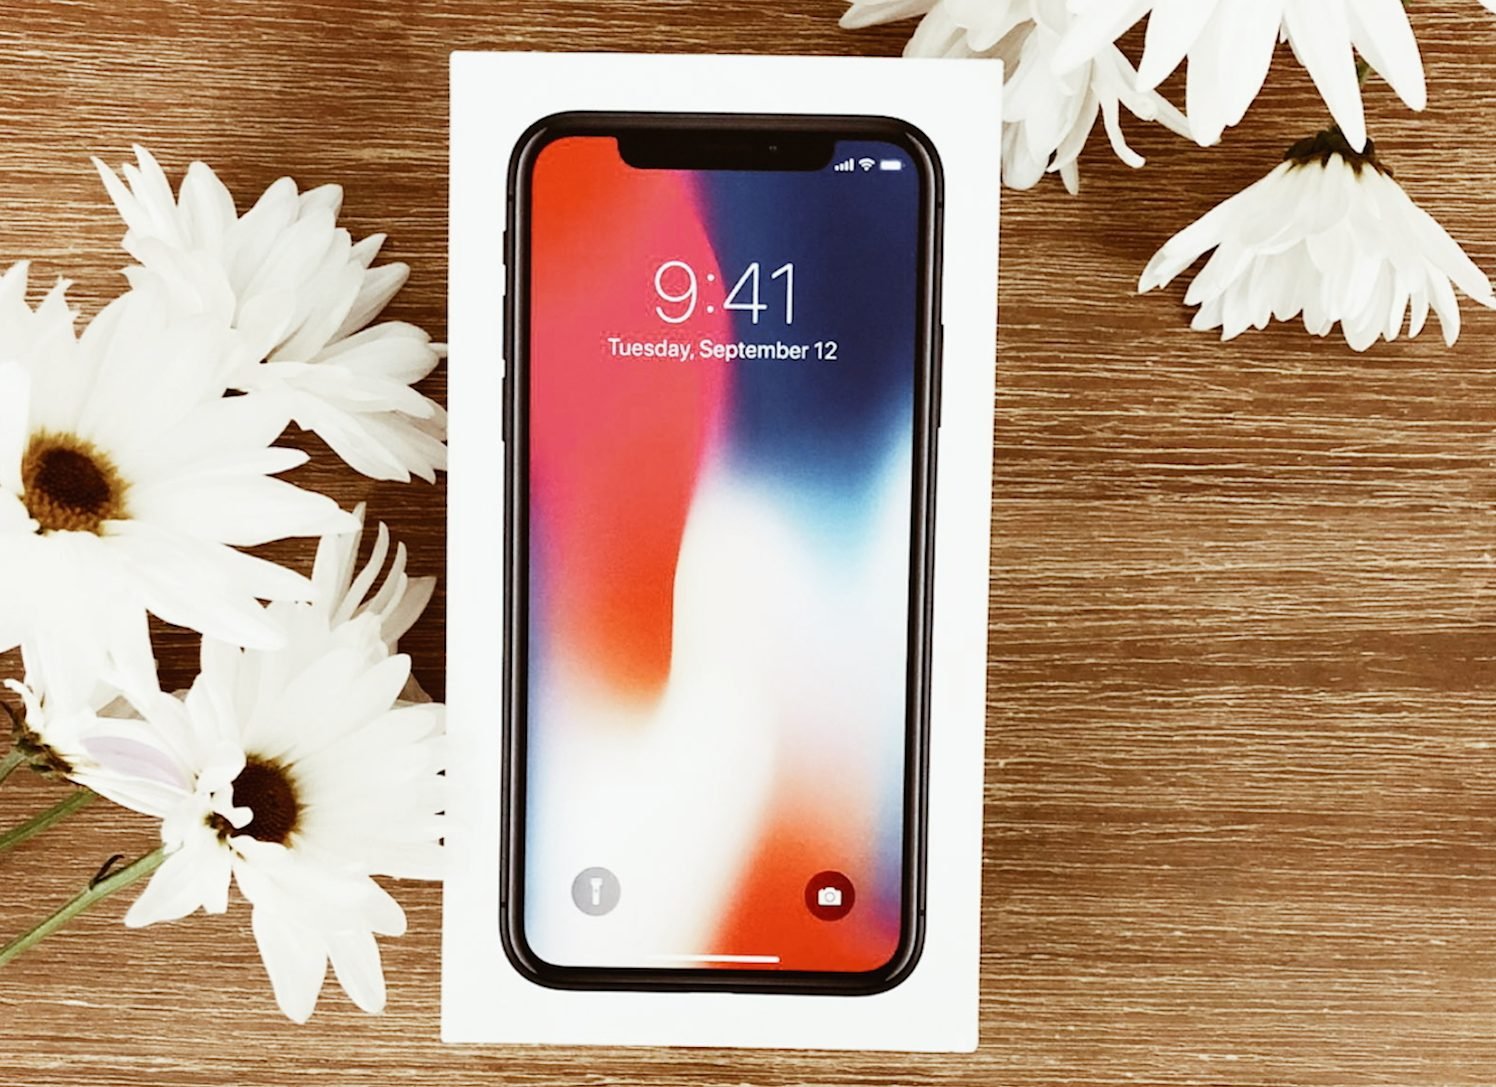 Win Iphone X when you enter Blogging Giveaway